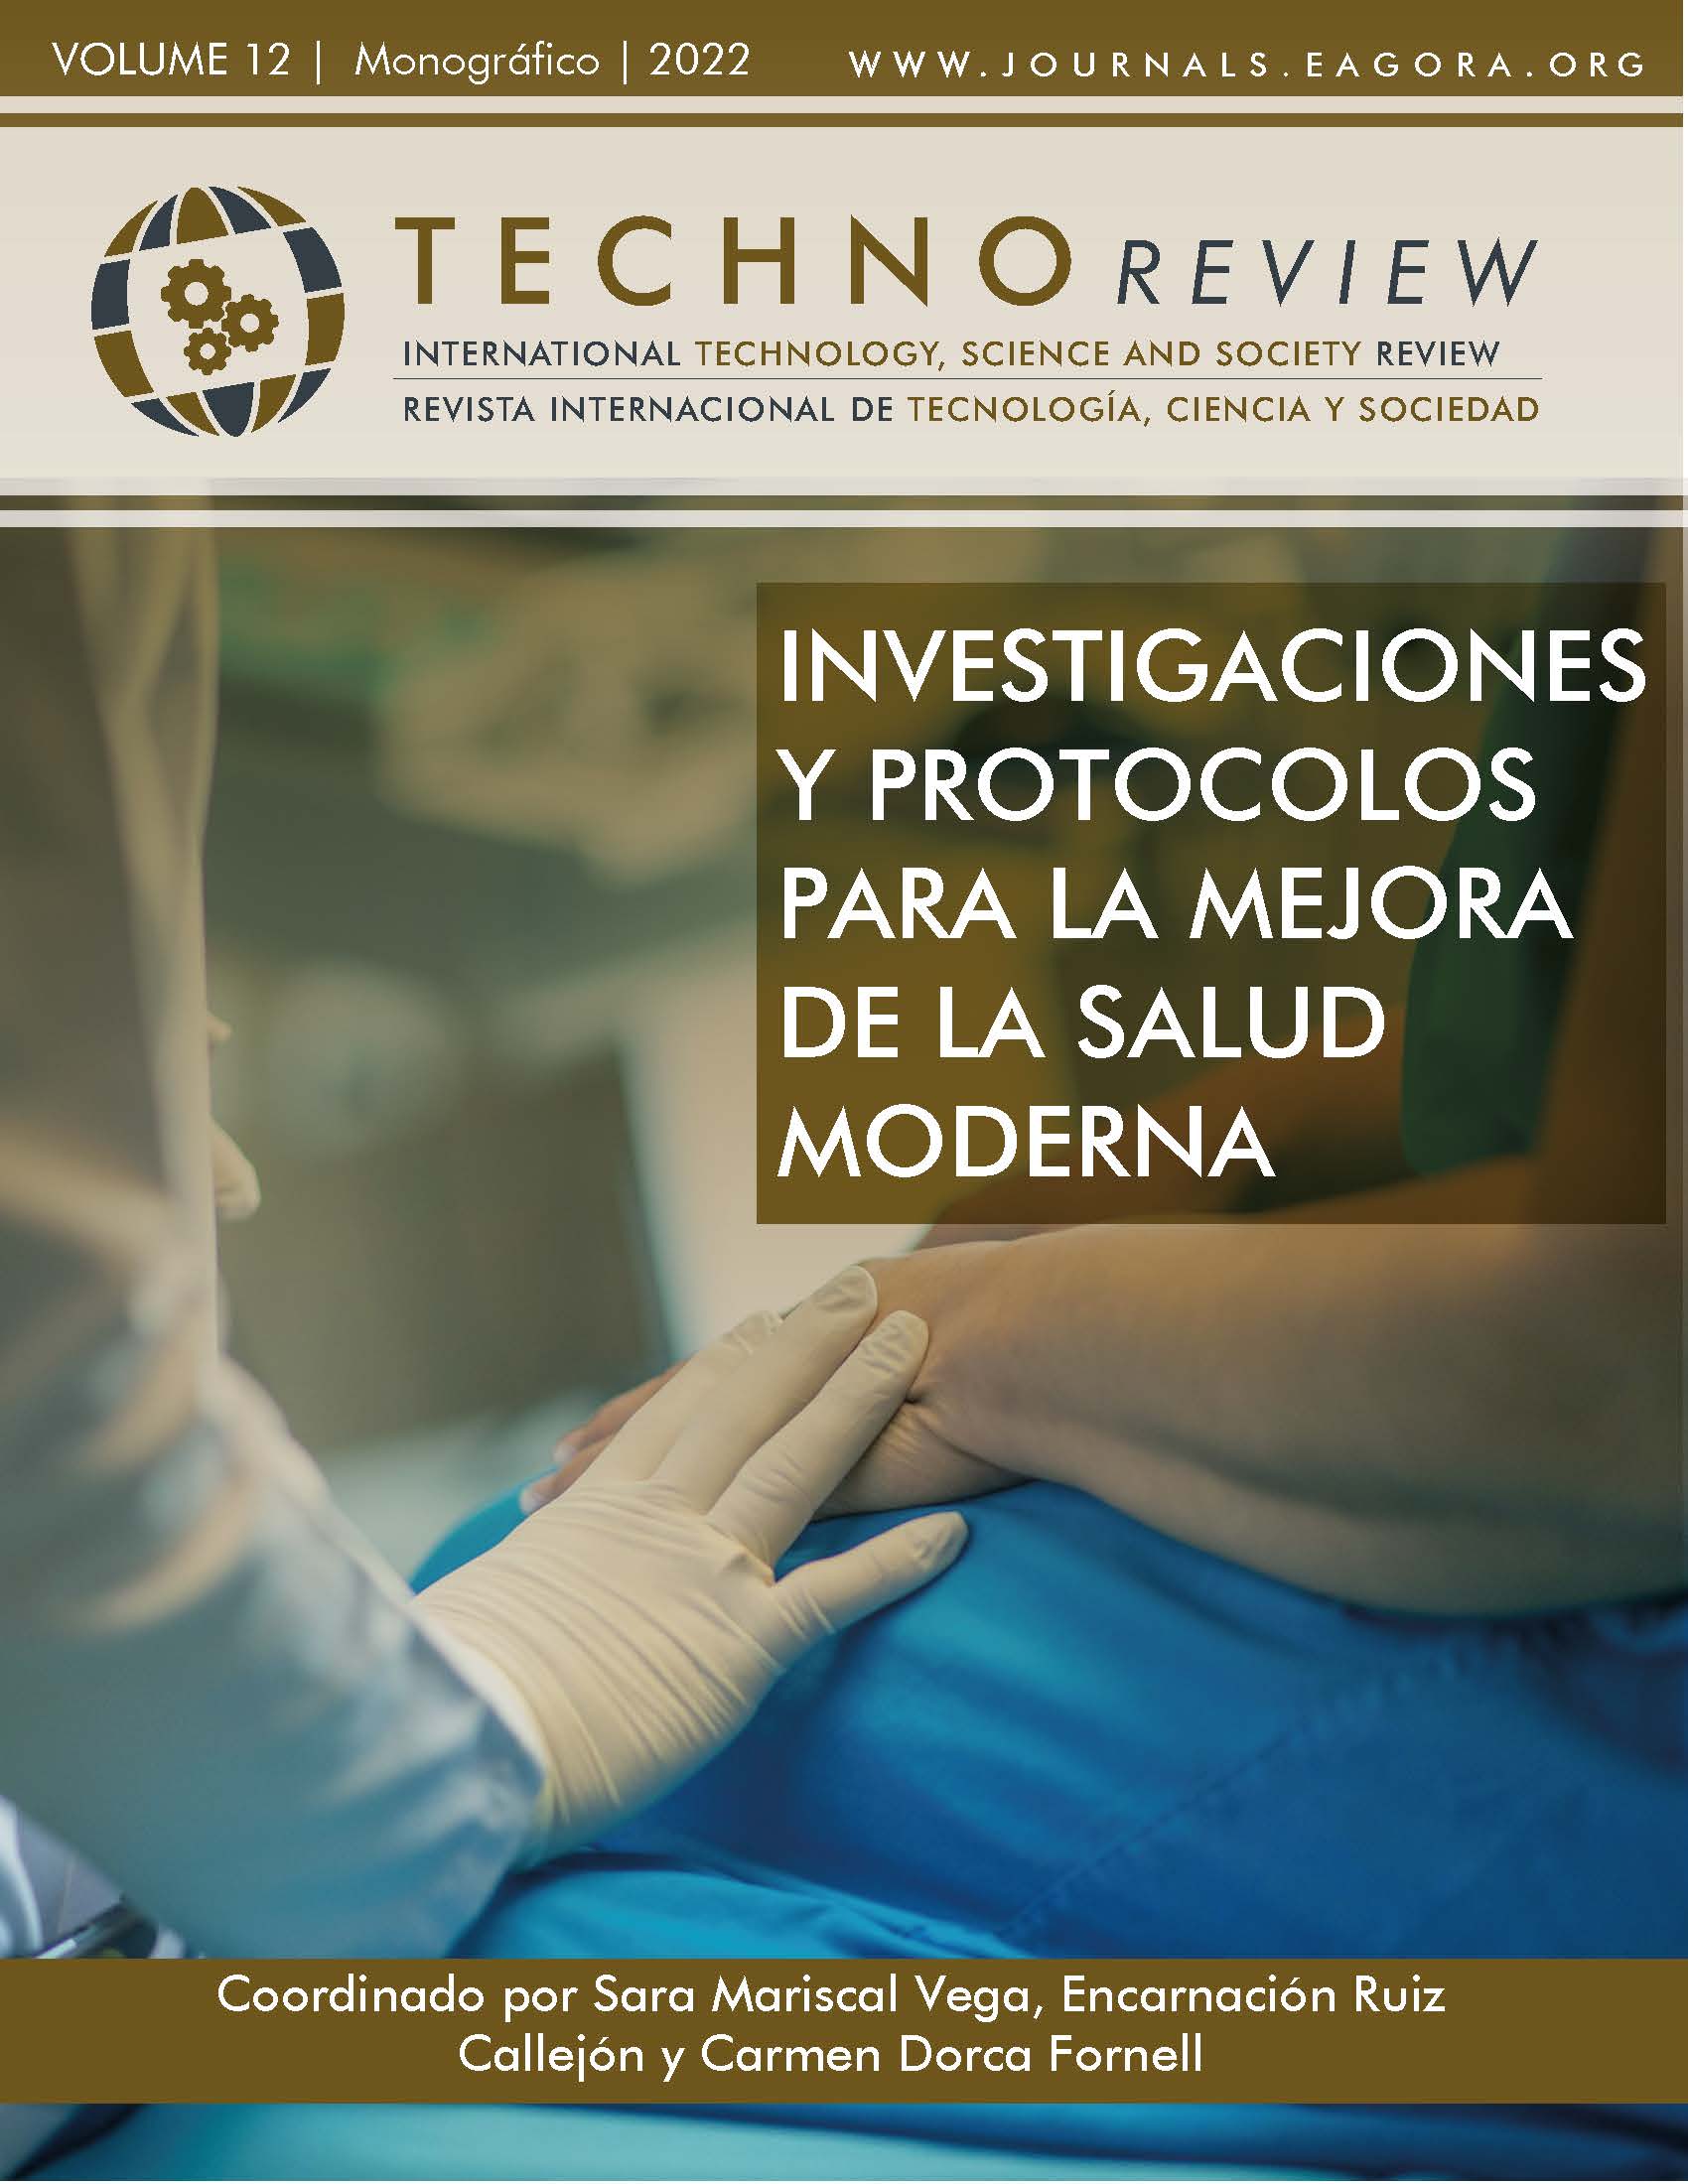 					View Vol. 12 No. 2 (2022): Monograph: "Research and protocols for modern health improvement"
				